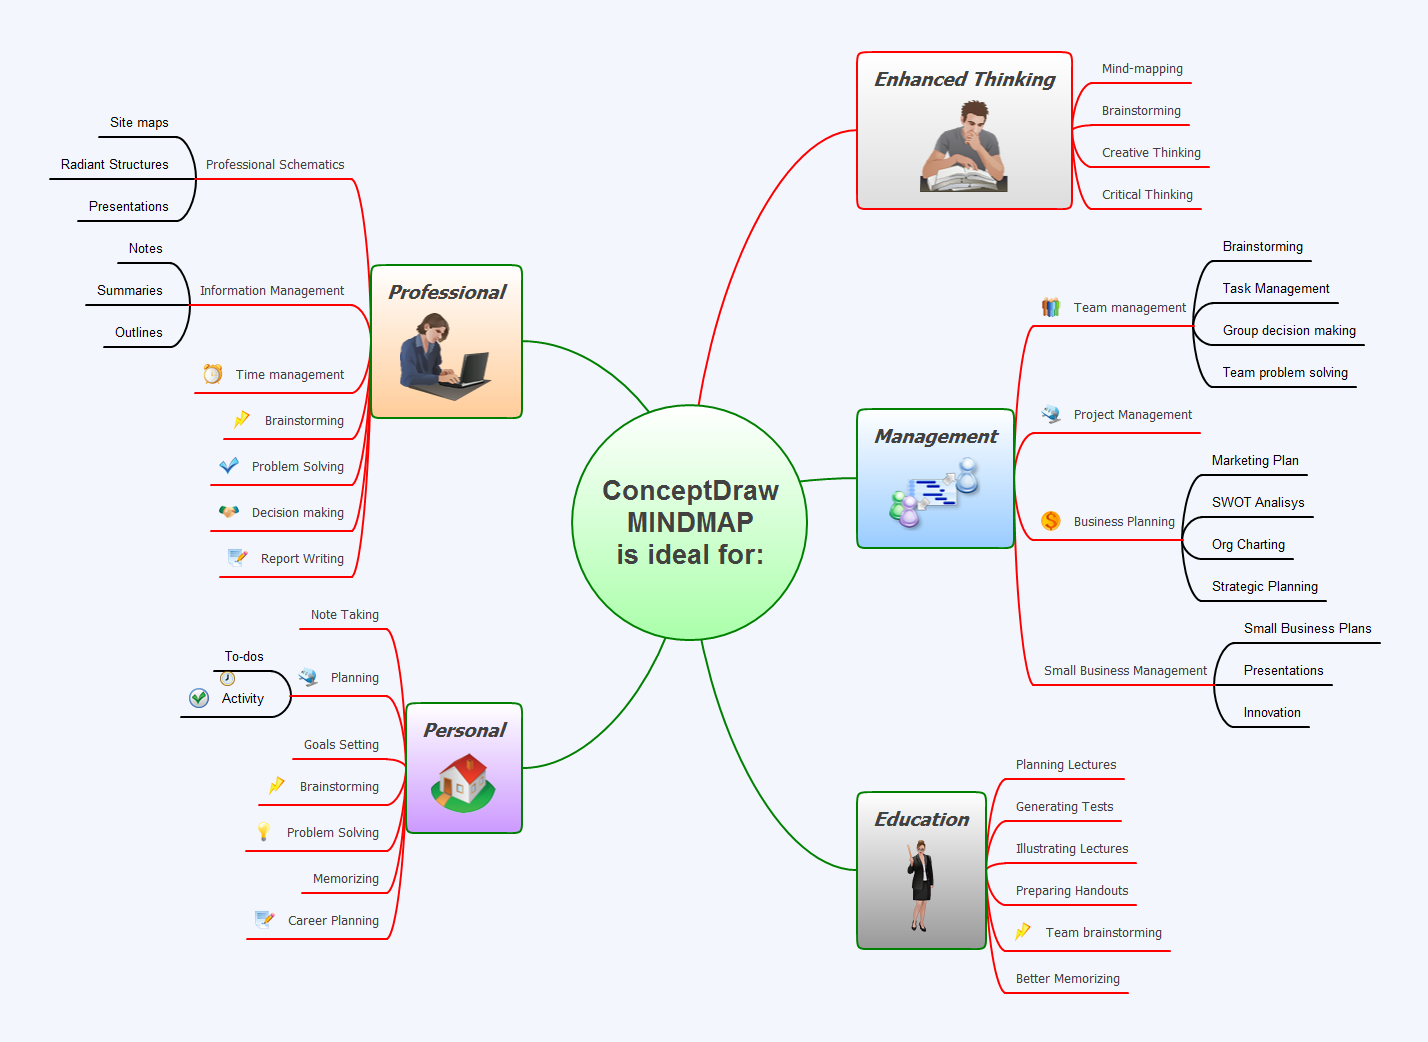 download the last version for apple Concept Draw Office 10.0.0.0 + MINDMAP 15.0.0.275